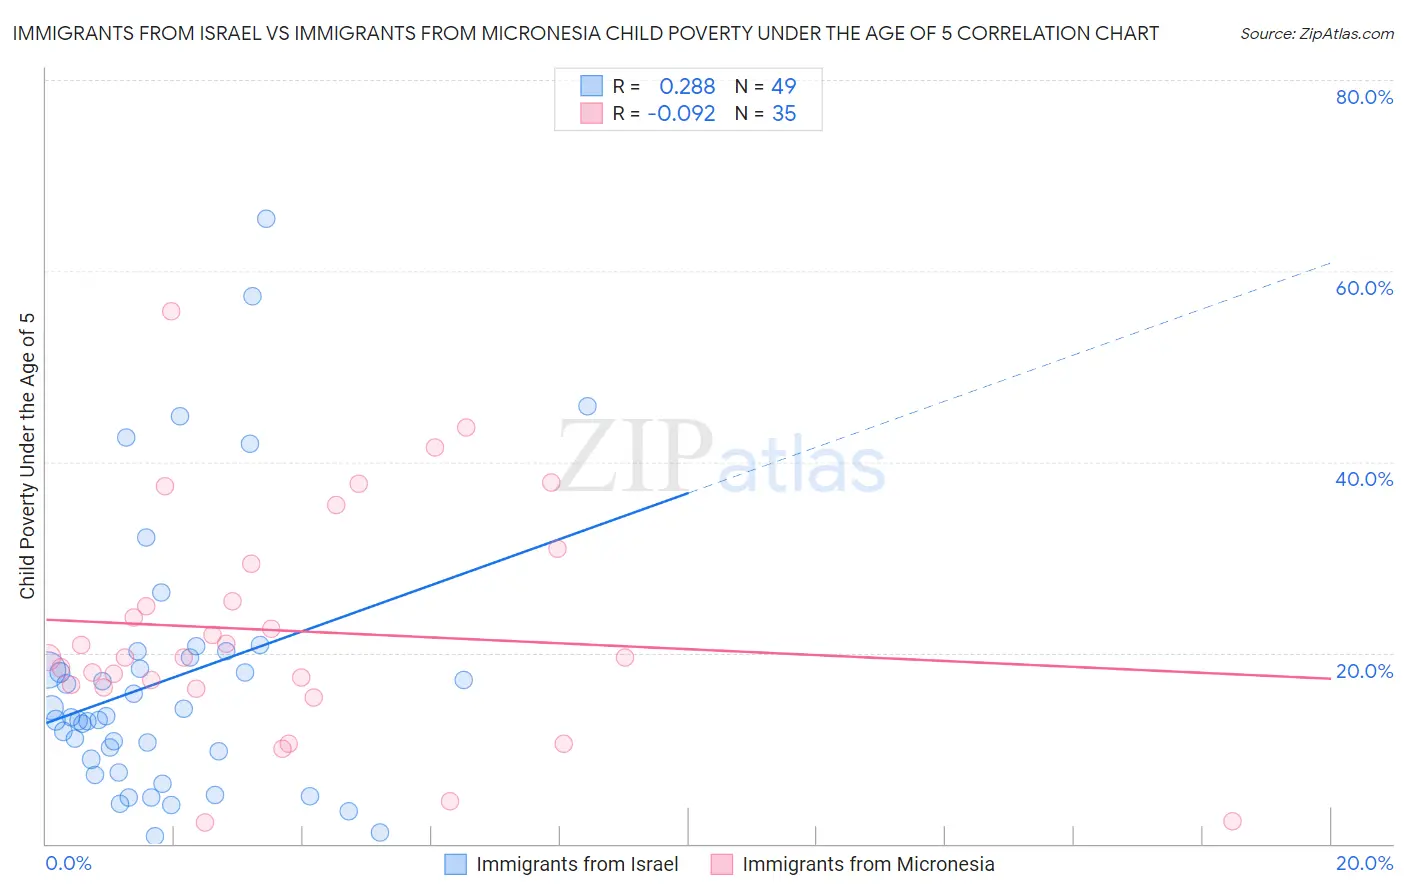 Immigrants from Israel vs Immigrants from Micronesia Child Poverty Under the Age of 5